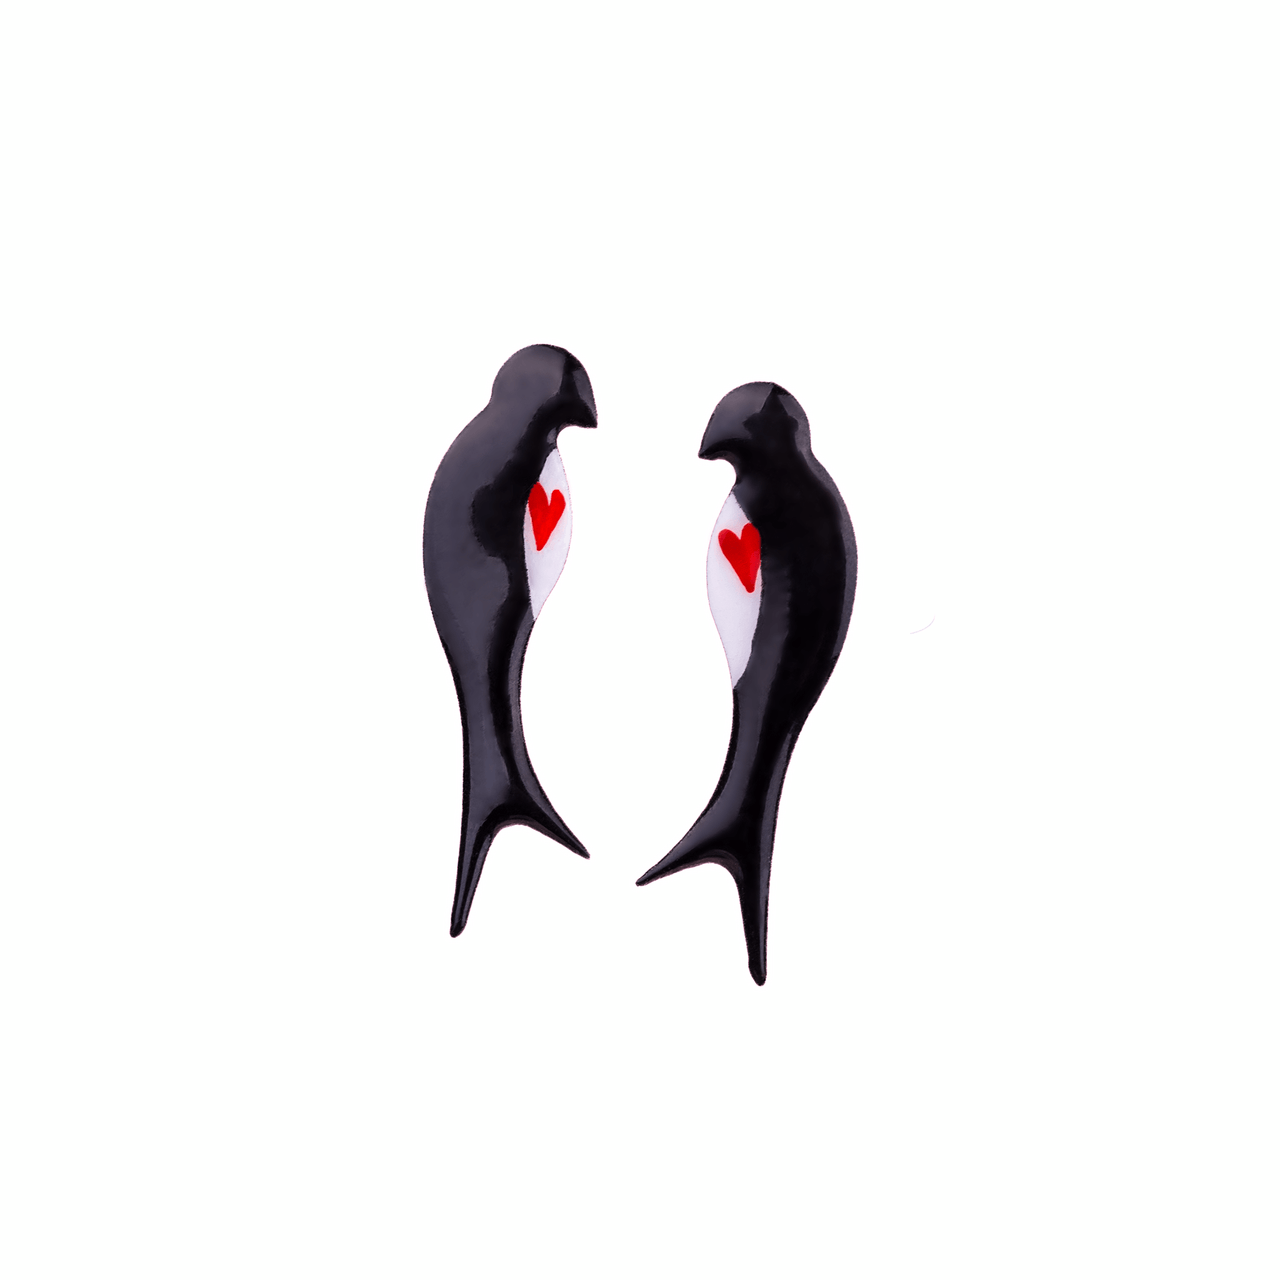 Black and White Swallow Earrings